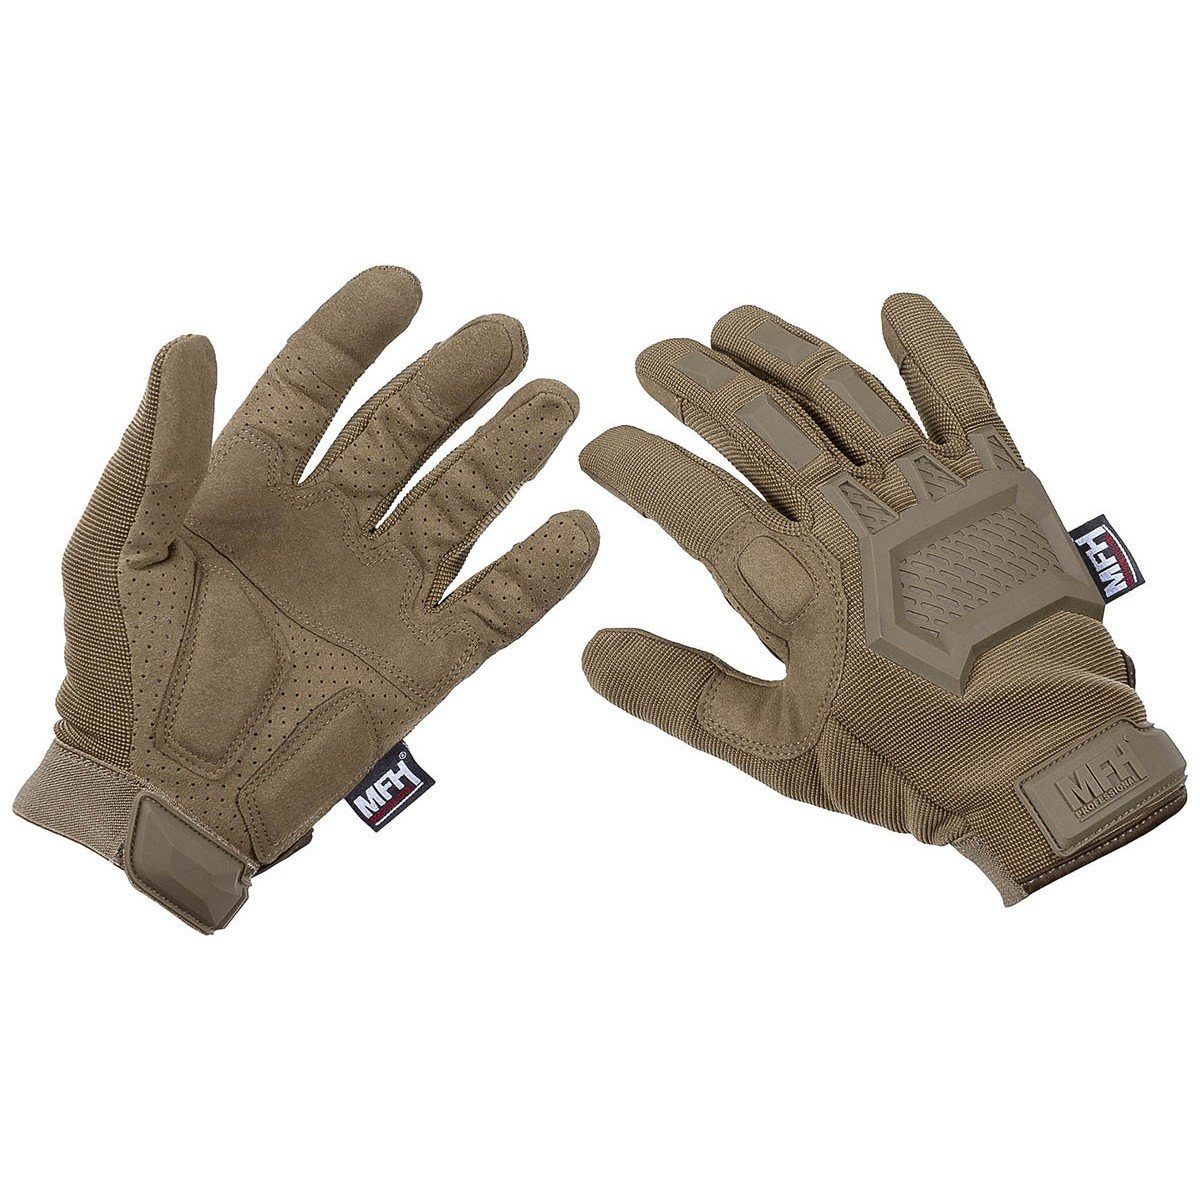 MFH Multisporthandschuhe Tactical Outdoor Handschuhe, "Action", coyote tan M